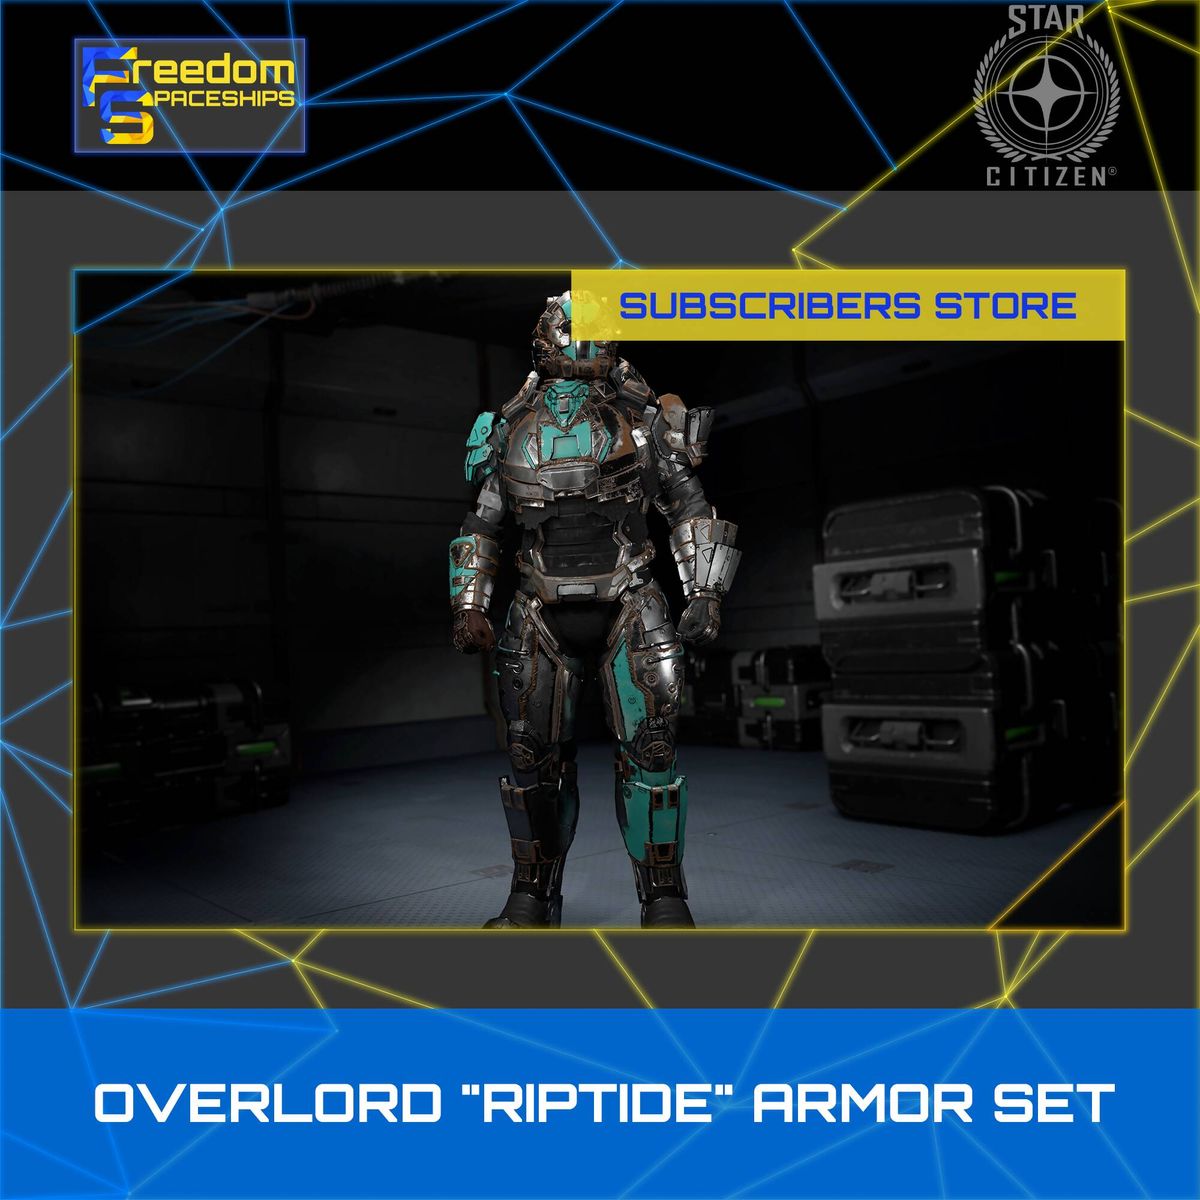 Subscribers Store - Overlord Riptide Armor Set